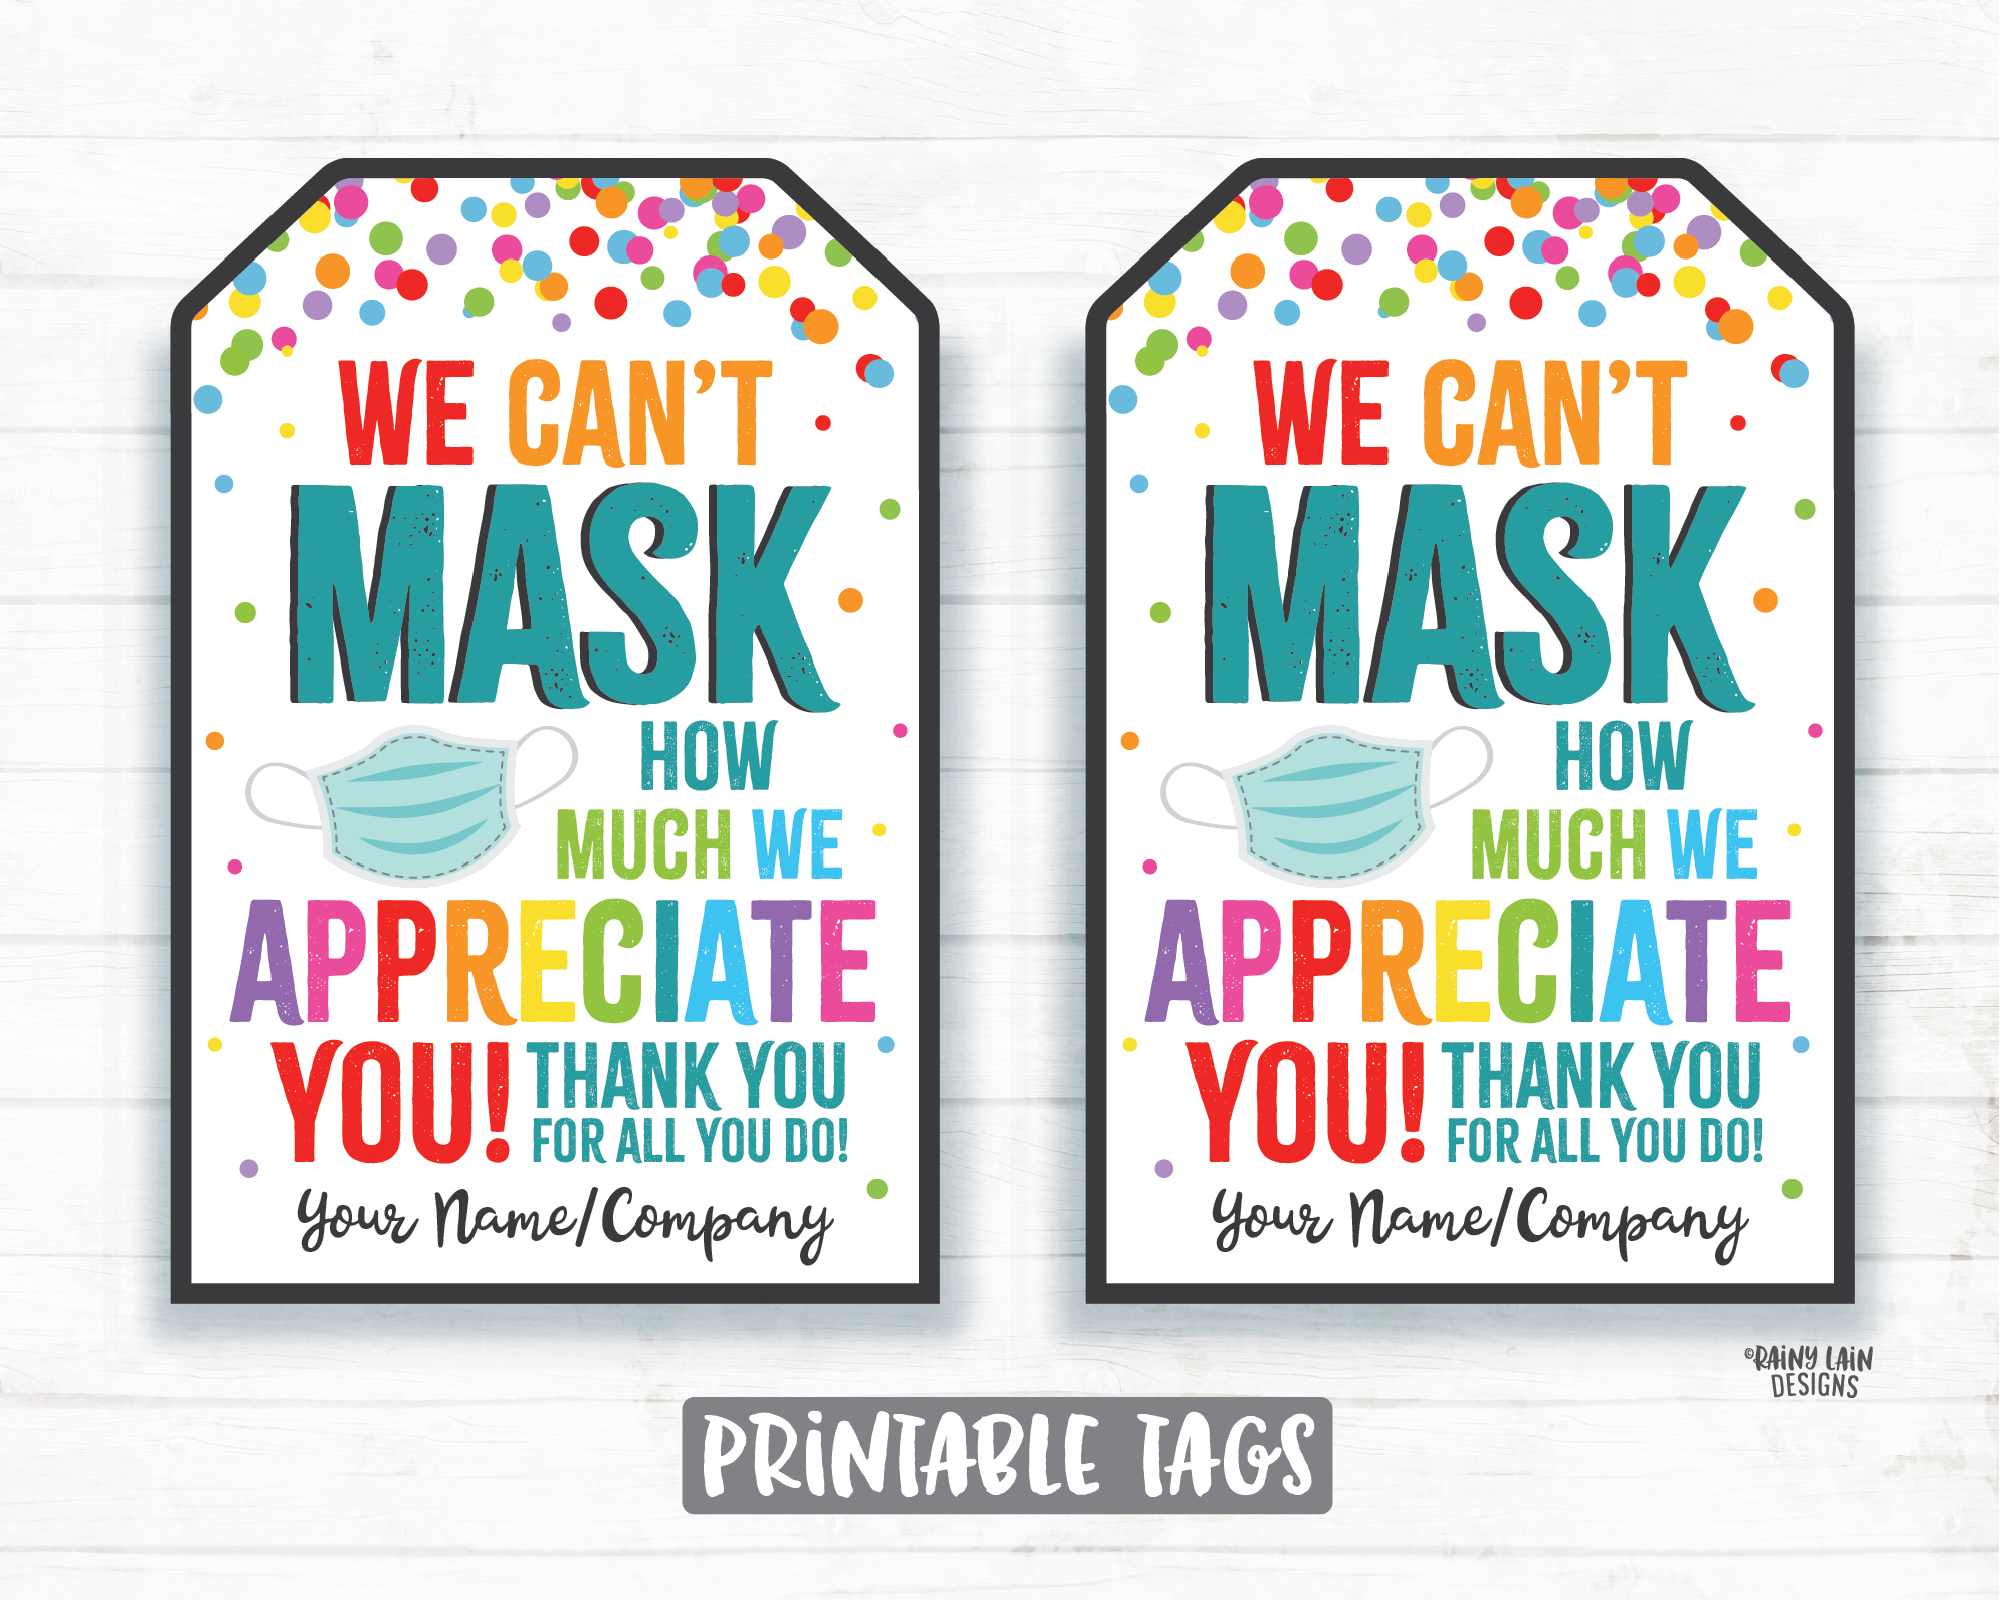 Can't Mask How Much we Appreciate You Face Mask Gift Tag Mask Tag Employee Appreciation Tag Company Frontline Essential Worker Staff Teacher